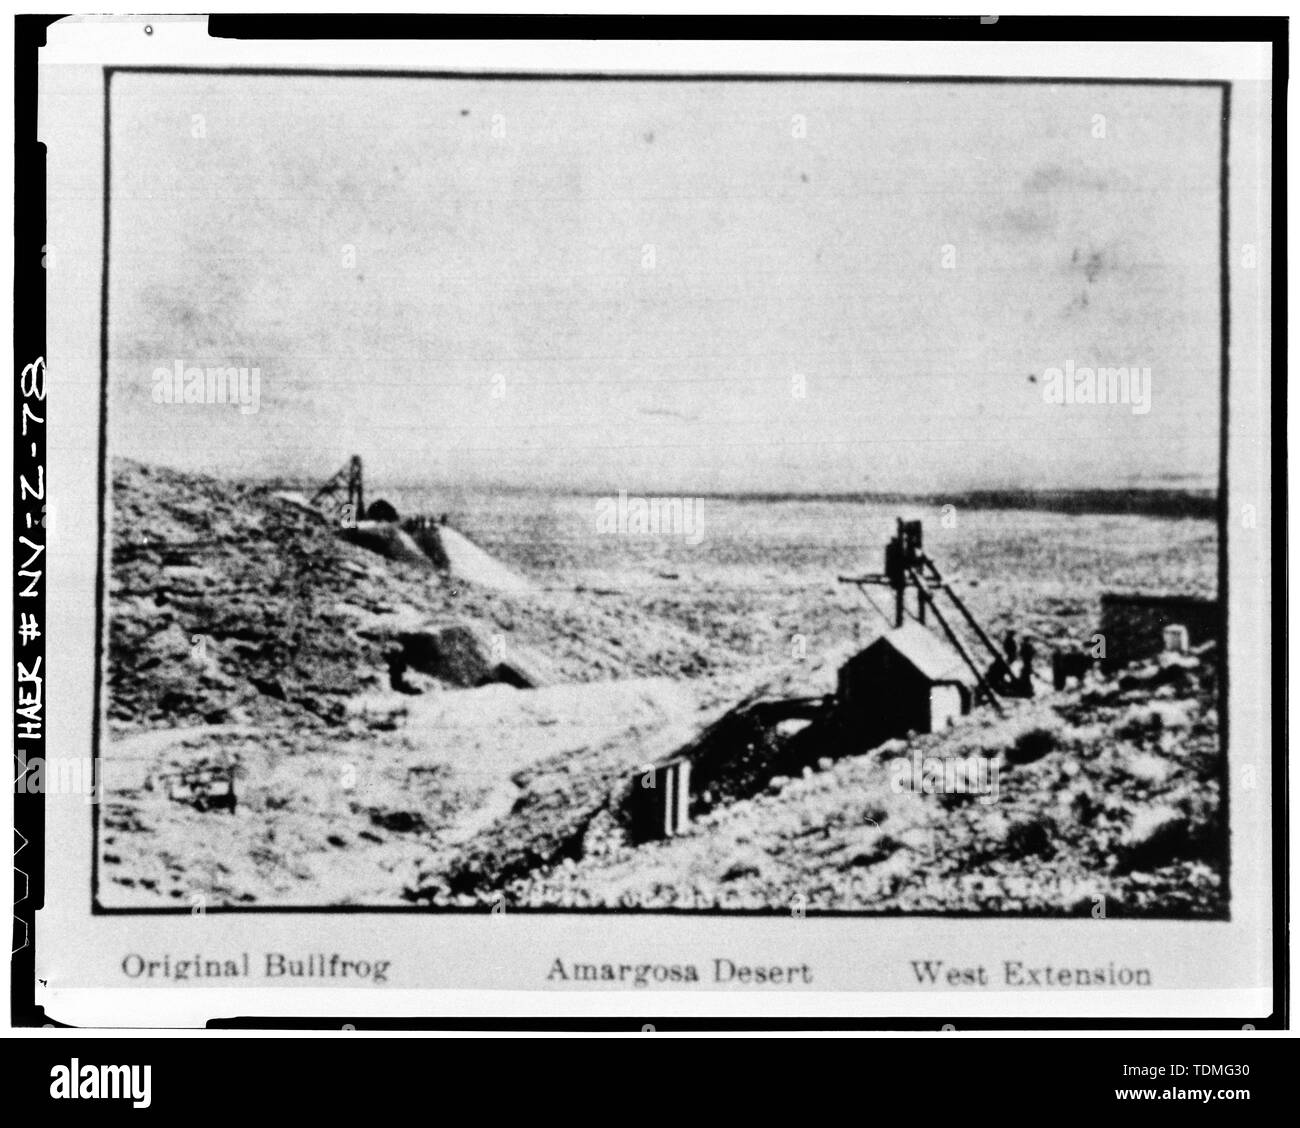 PHOTOCOPY OF PHOTO SHOWING ORIGINAL BULLFROG MINE (LEFT BACKGROUND) AND BULLFROG WEST EXTENSION MINE (RIGHT FOREGROUND). From Rhyolite, Nevada Herald (22 March 1907) - Bullfrog Mine, Rhyolite, Nye County, NV Stock Photo